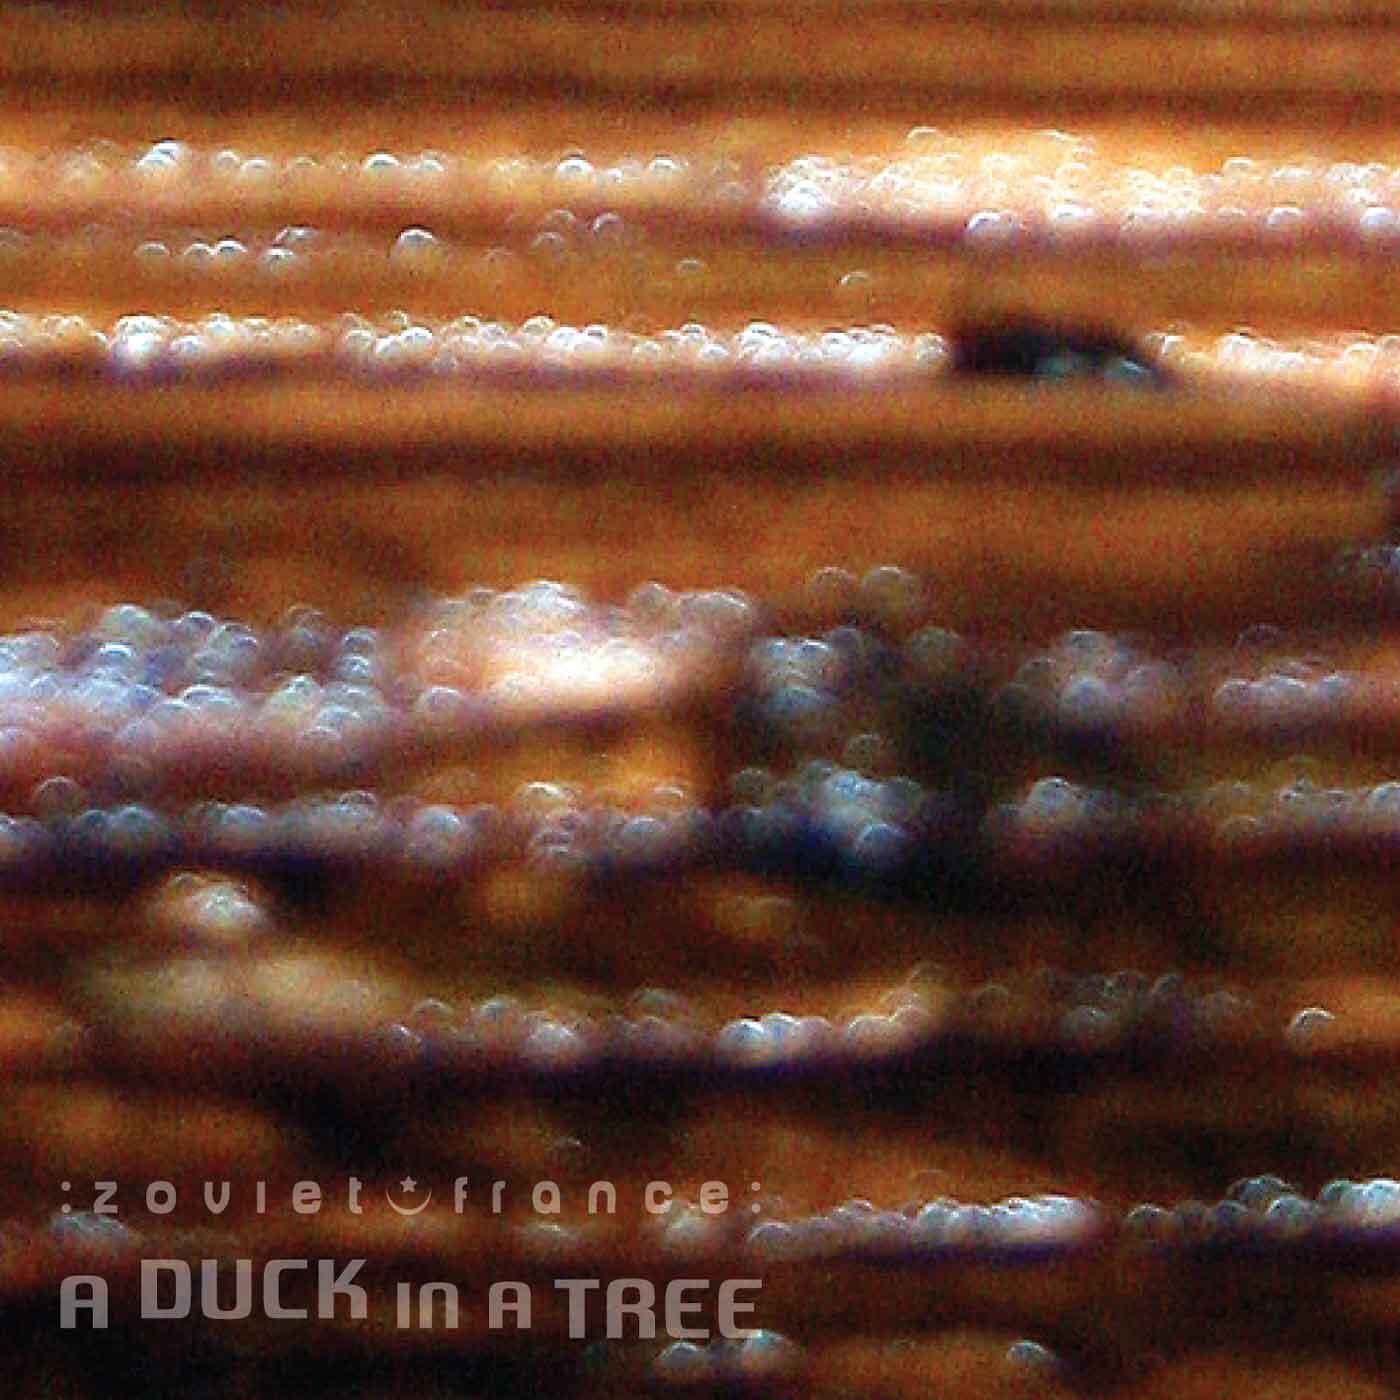 A-Duck-in-a-Tree-2014-10-25-_-Authentic-